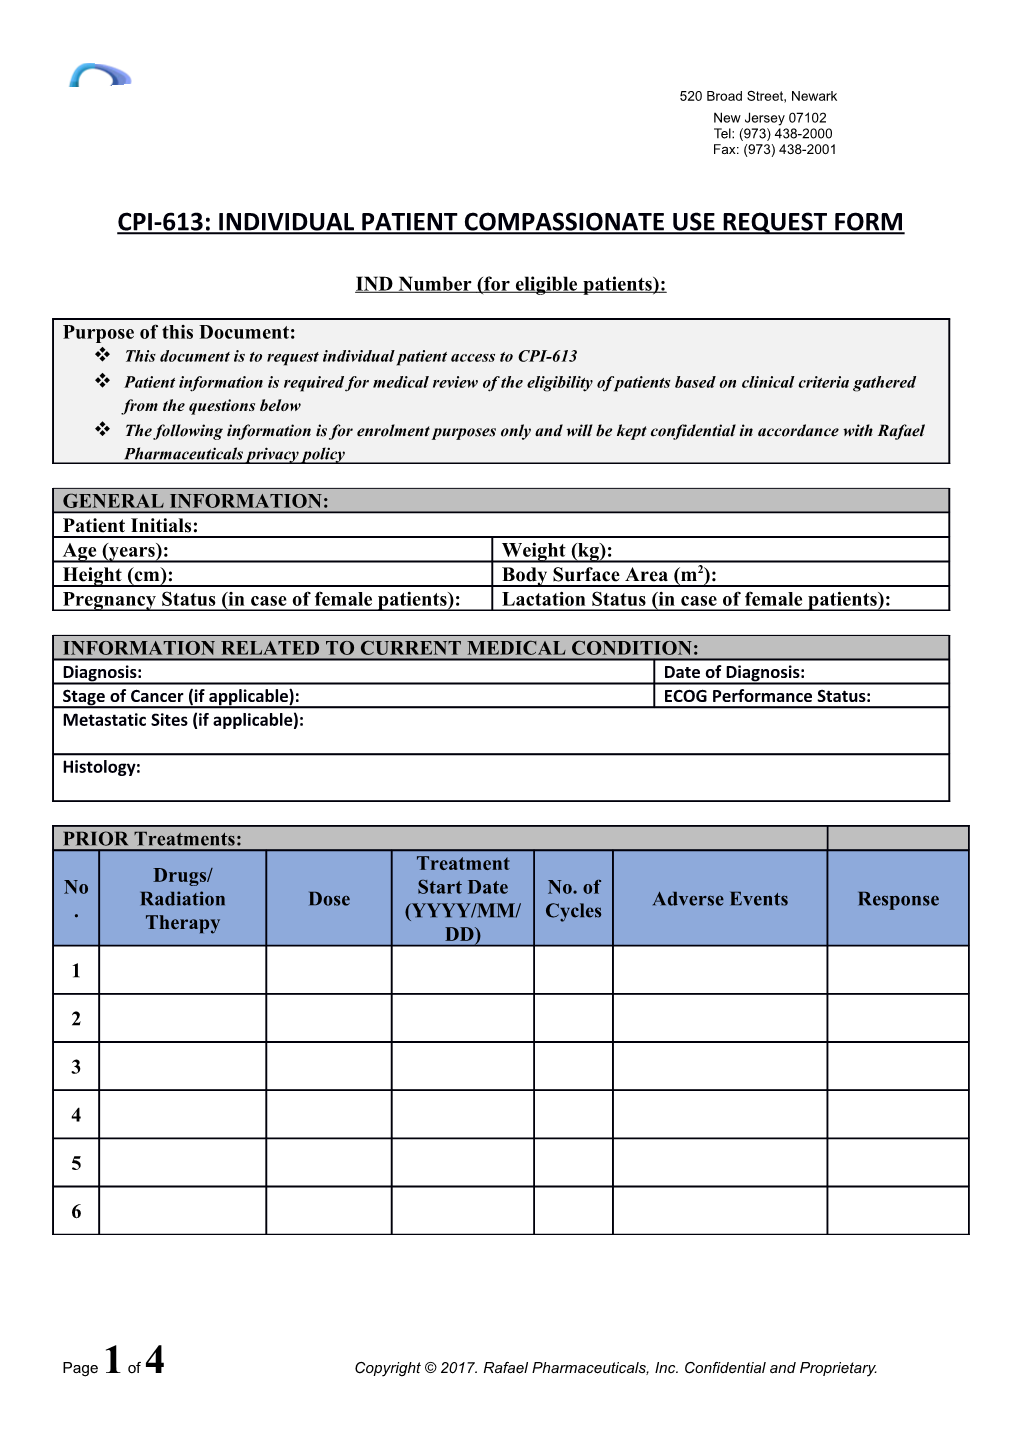 Cpi-613: Individual Patient Compassionate Use Request Form